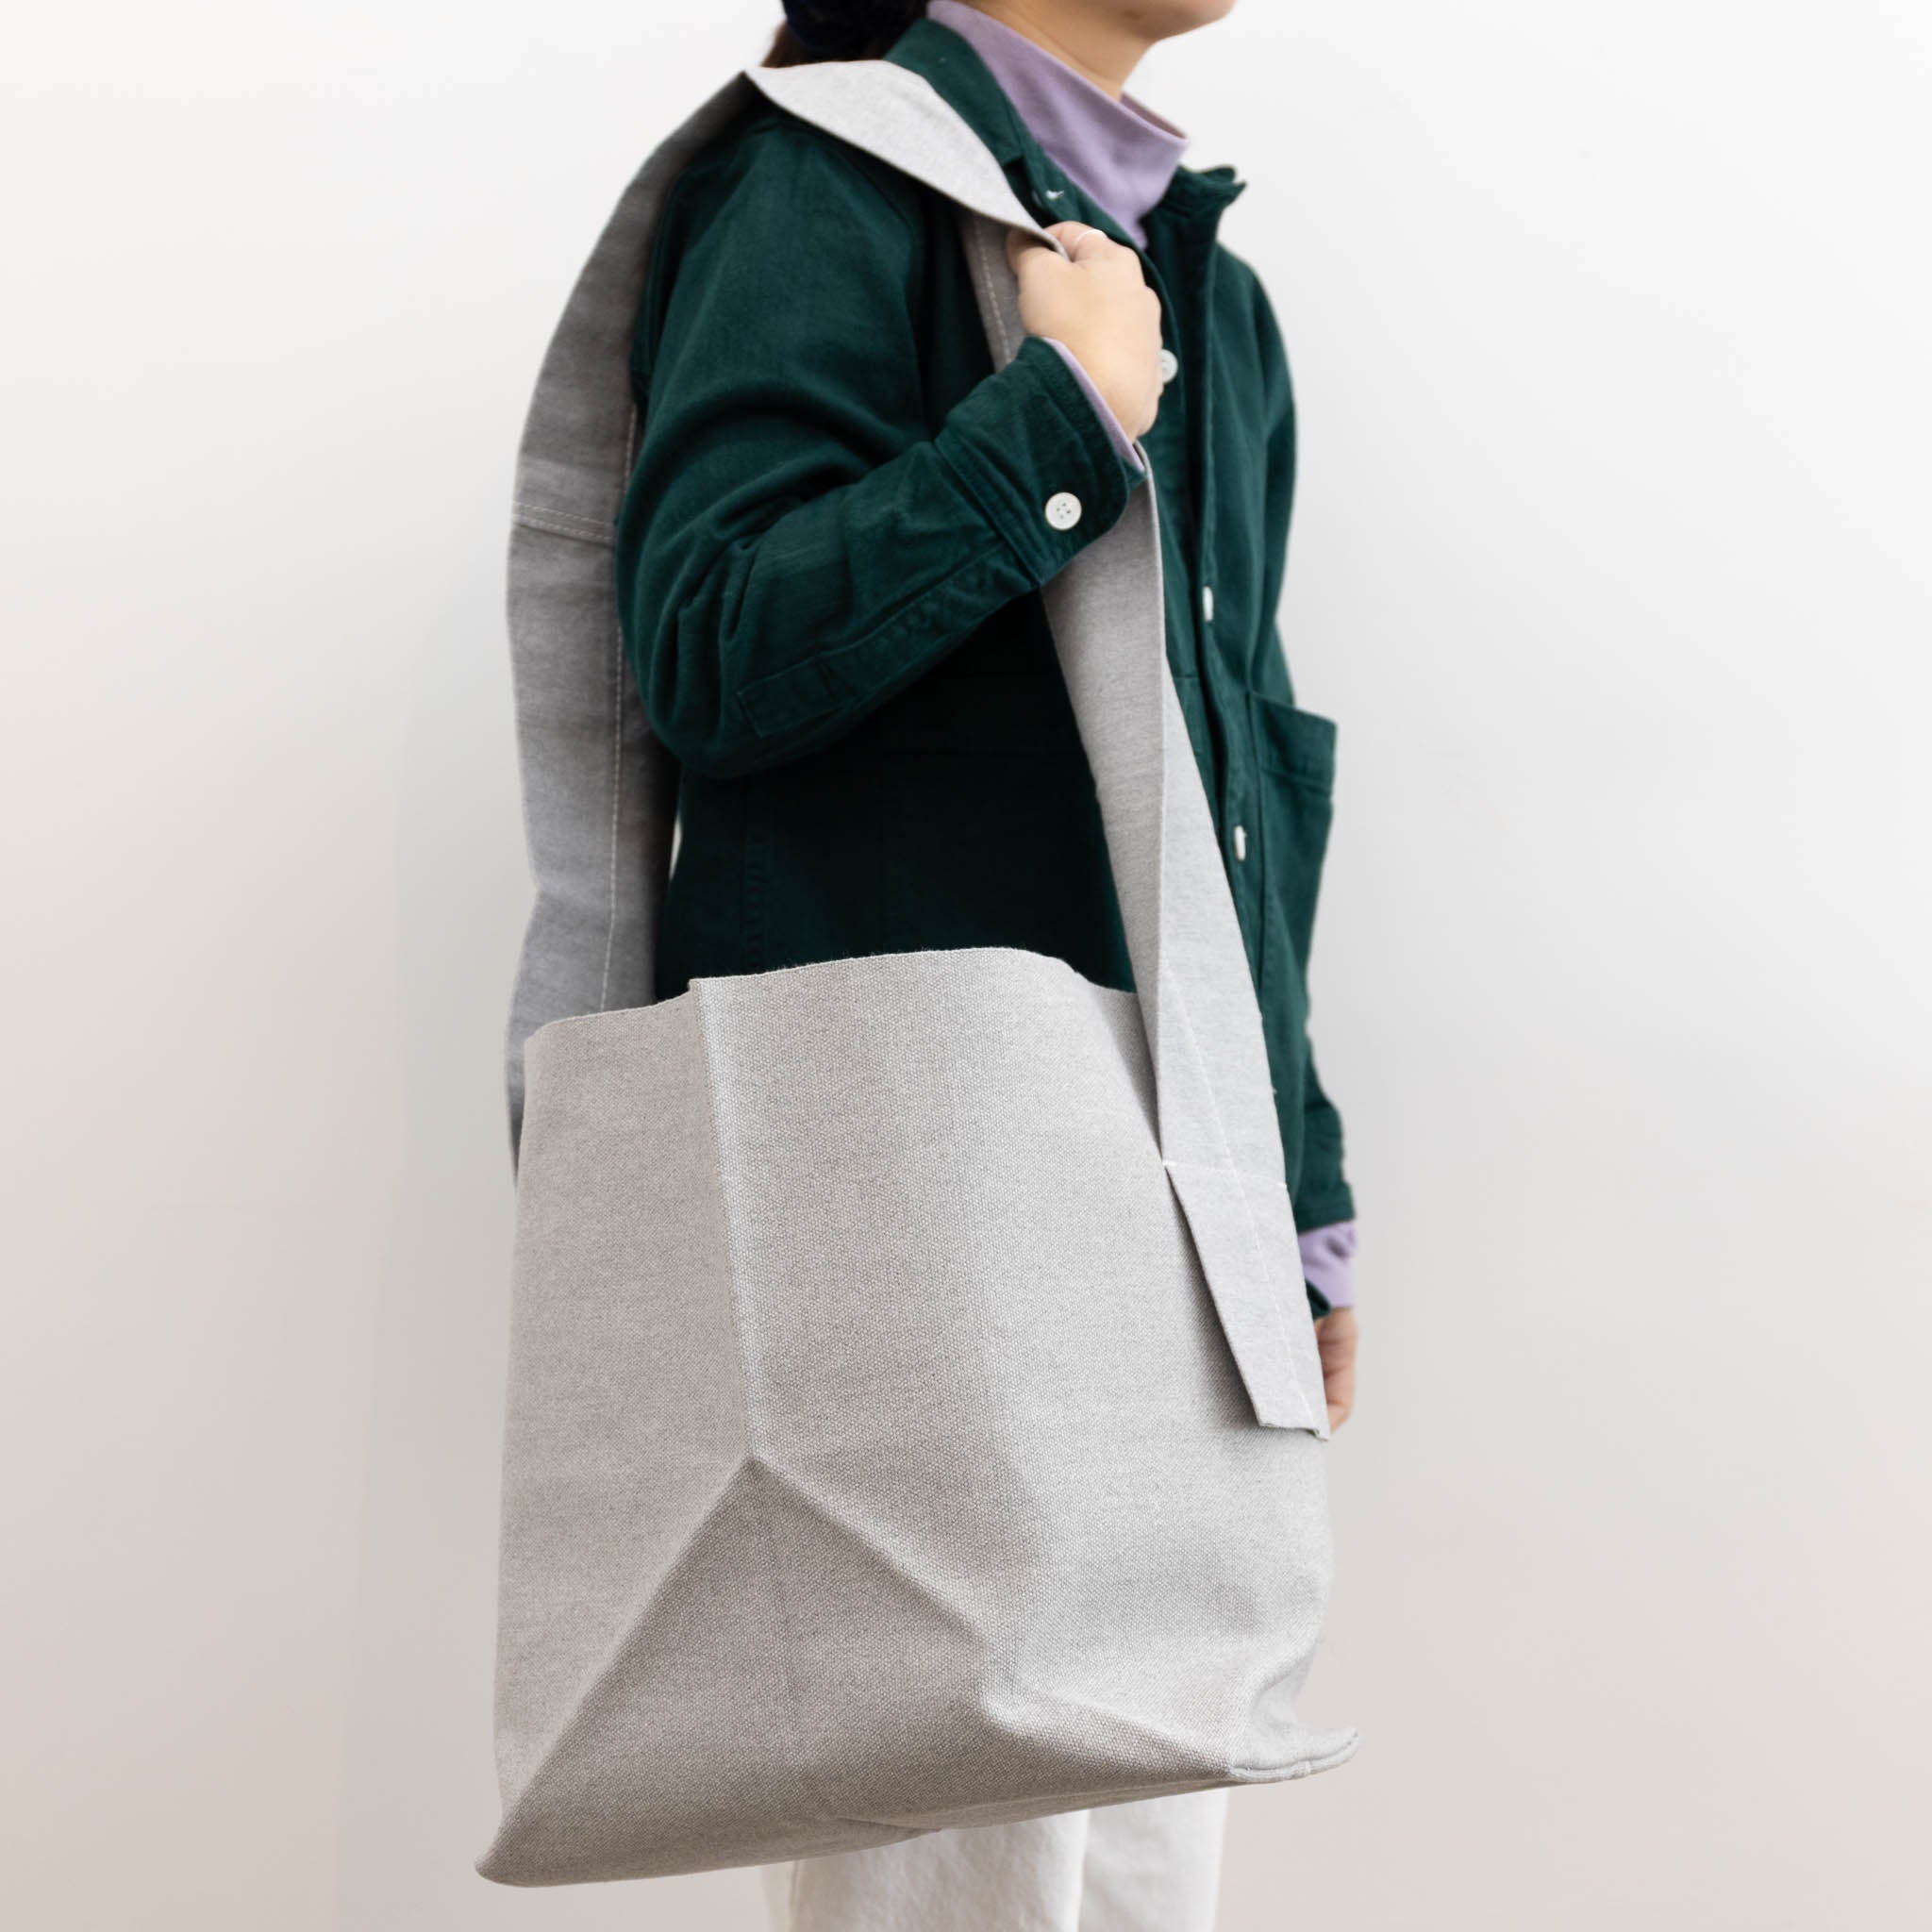 Origami Tote Bag With Pocket